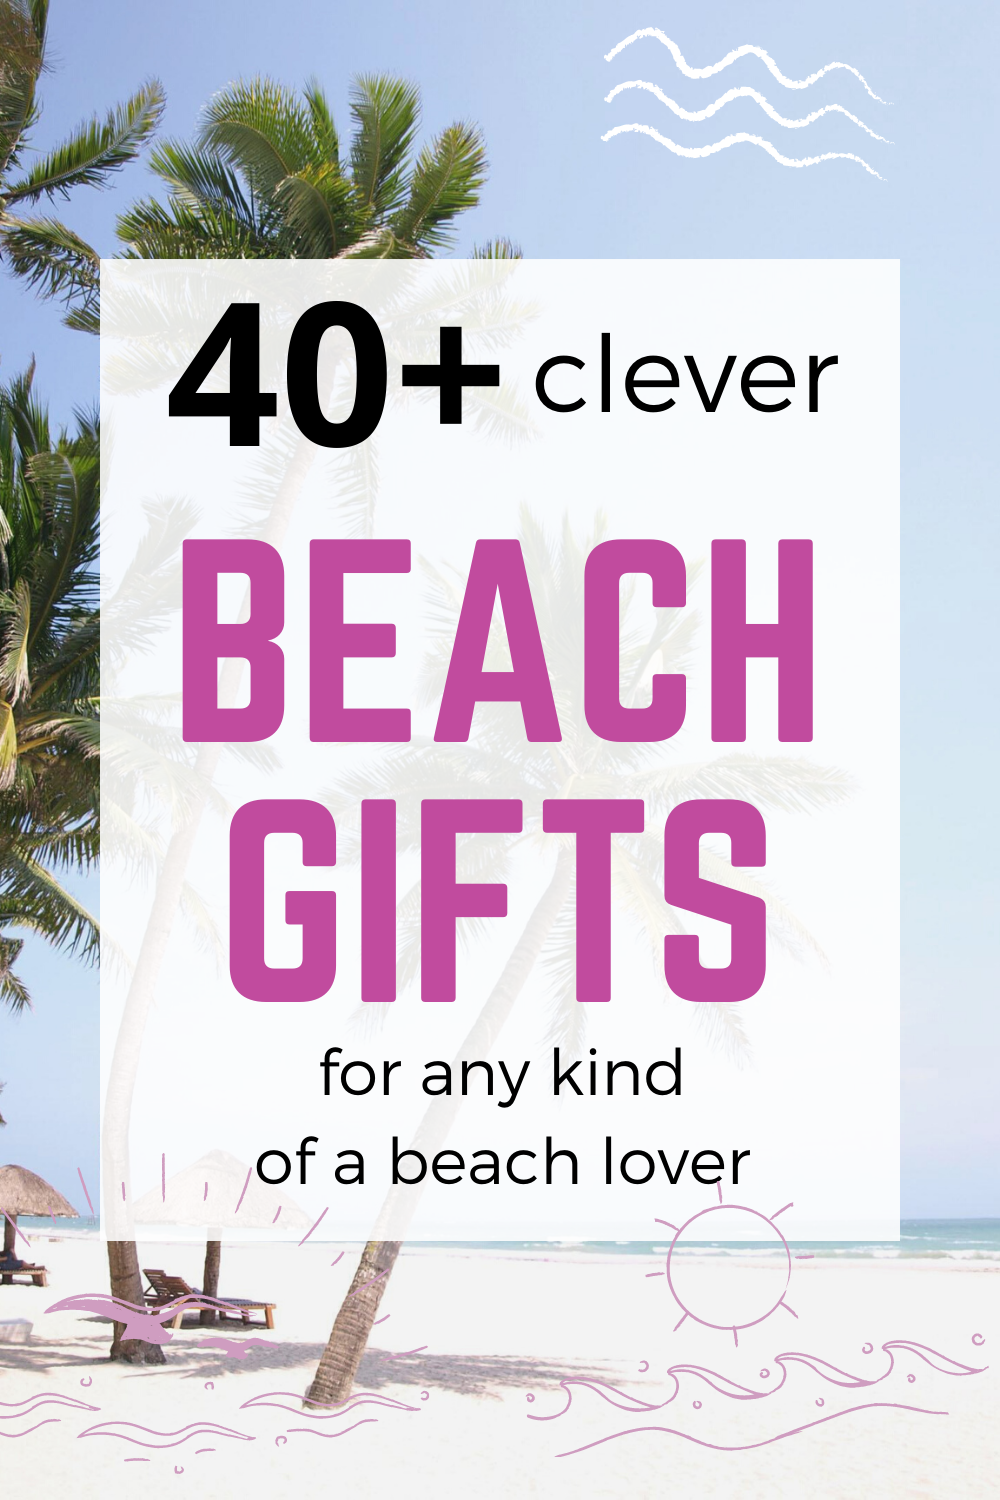 40+ clever beach gifts for any kind of beach lovers